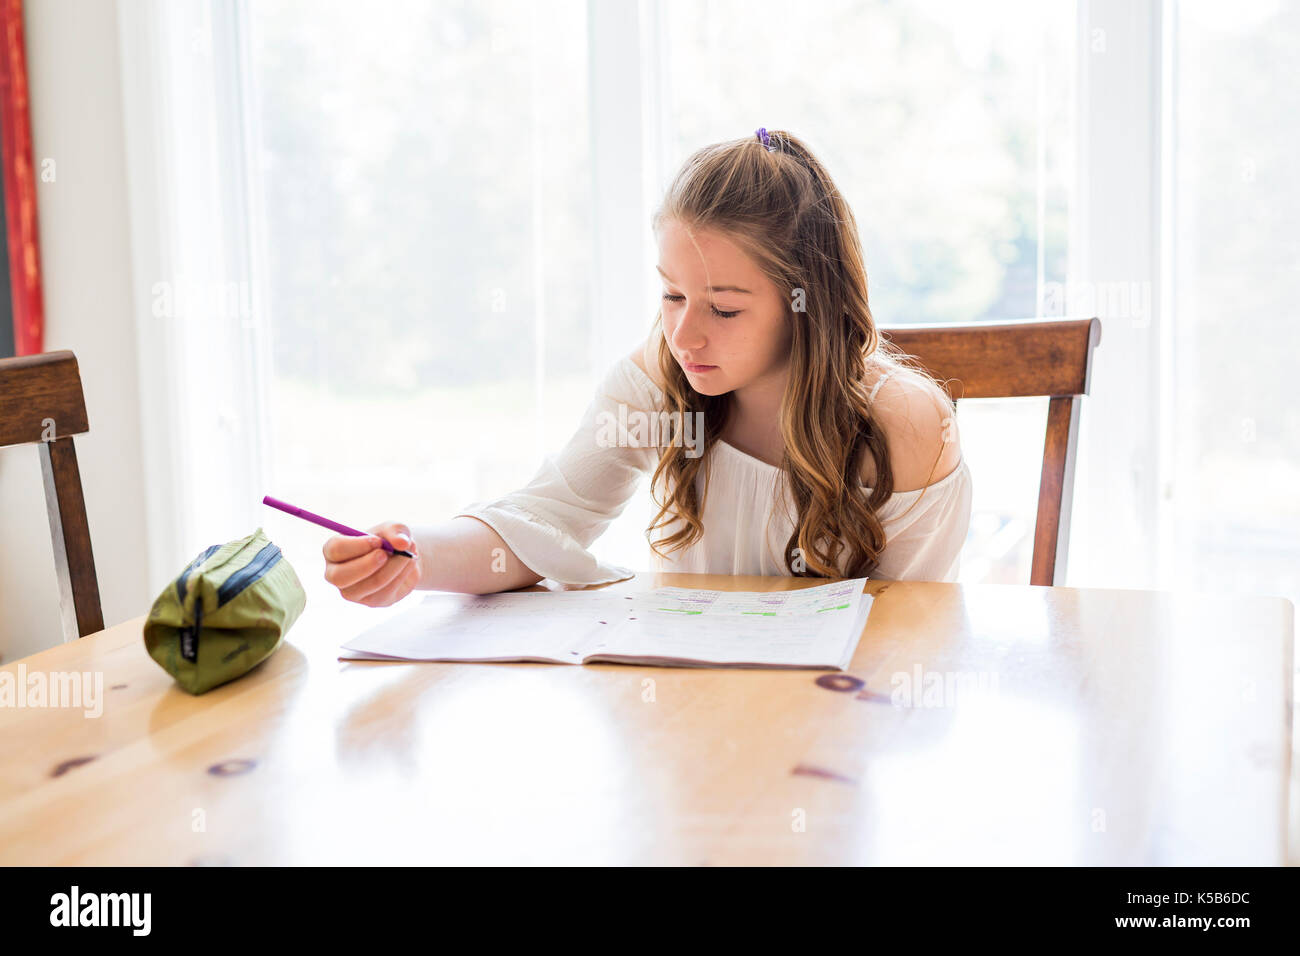 Cute girl doing homework at home Banque D'Images